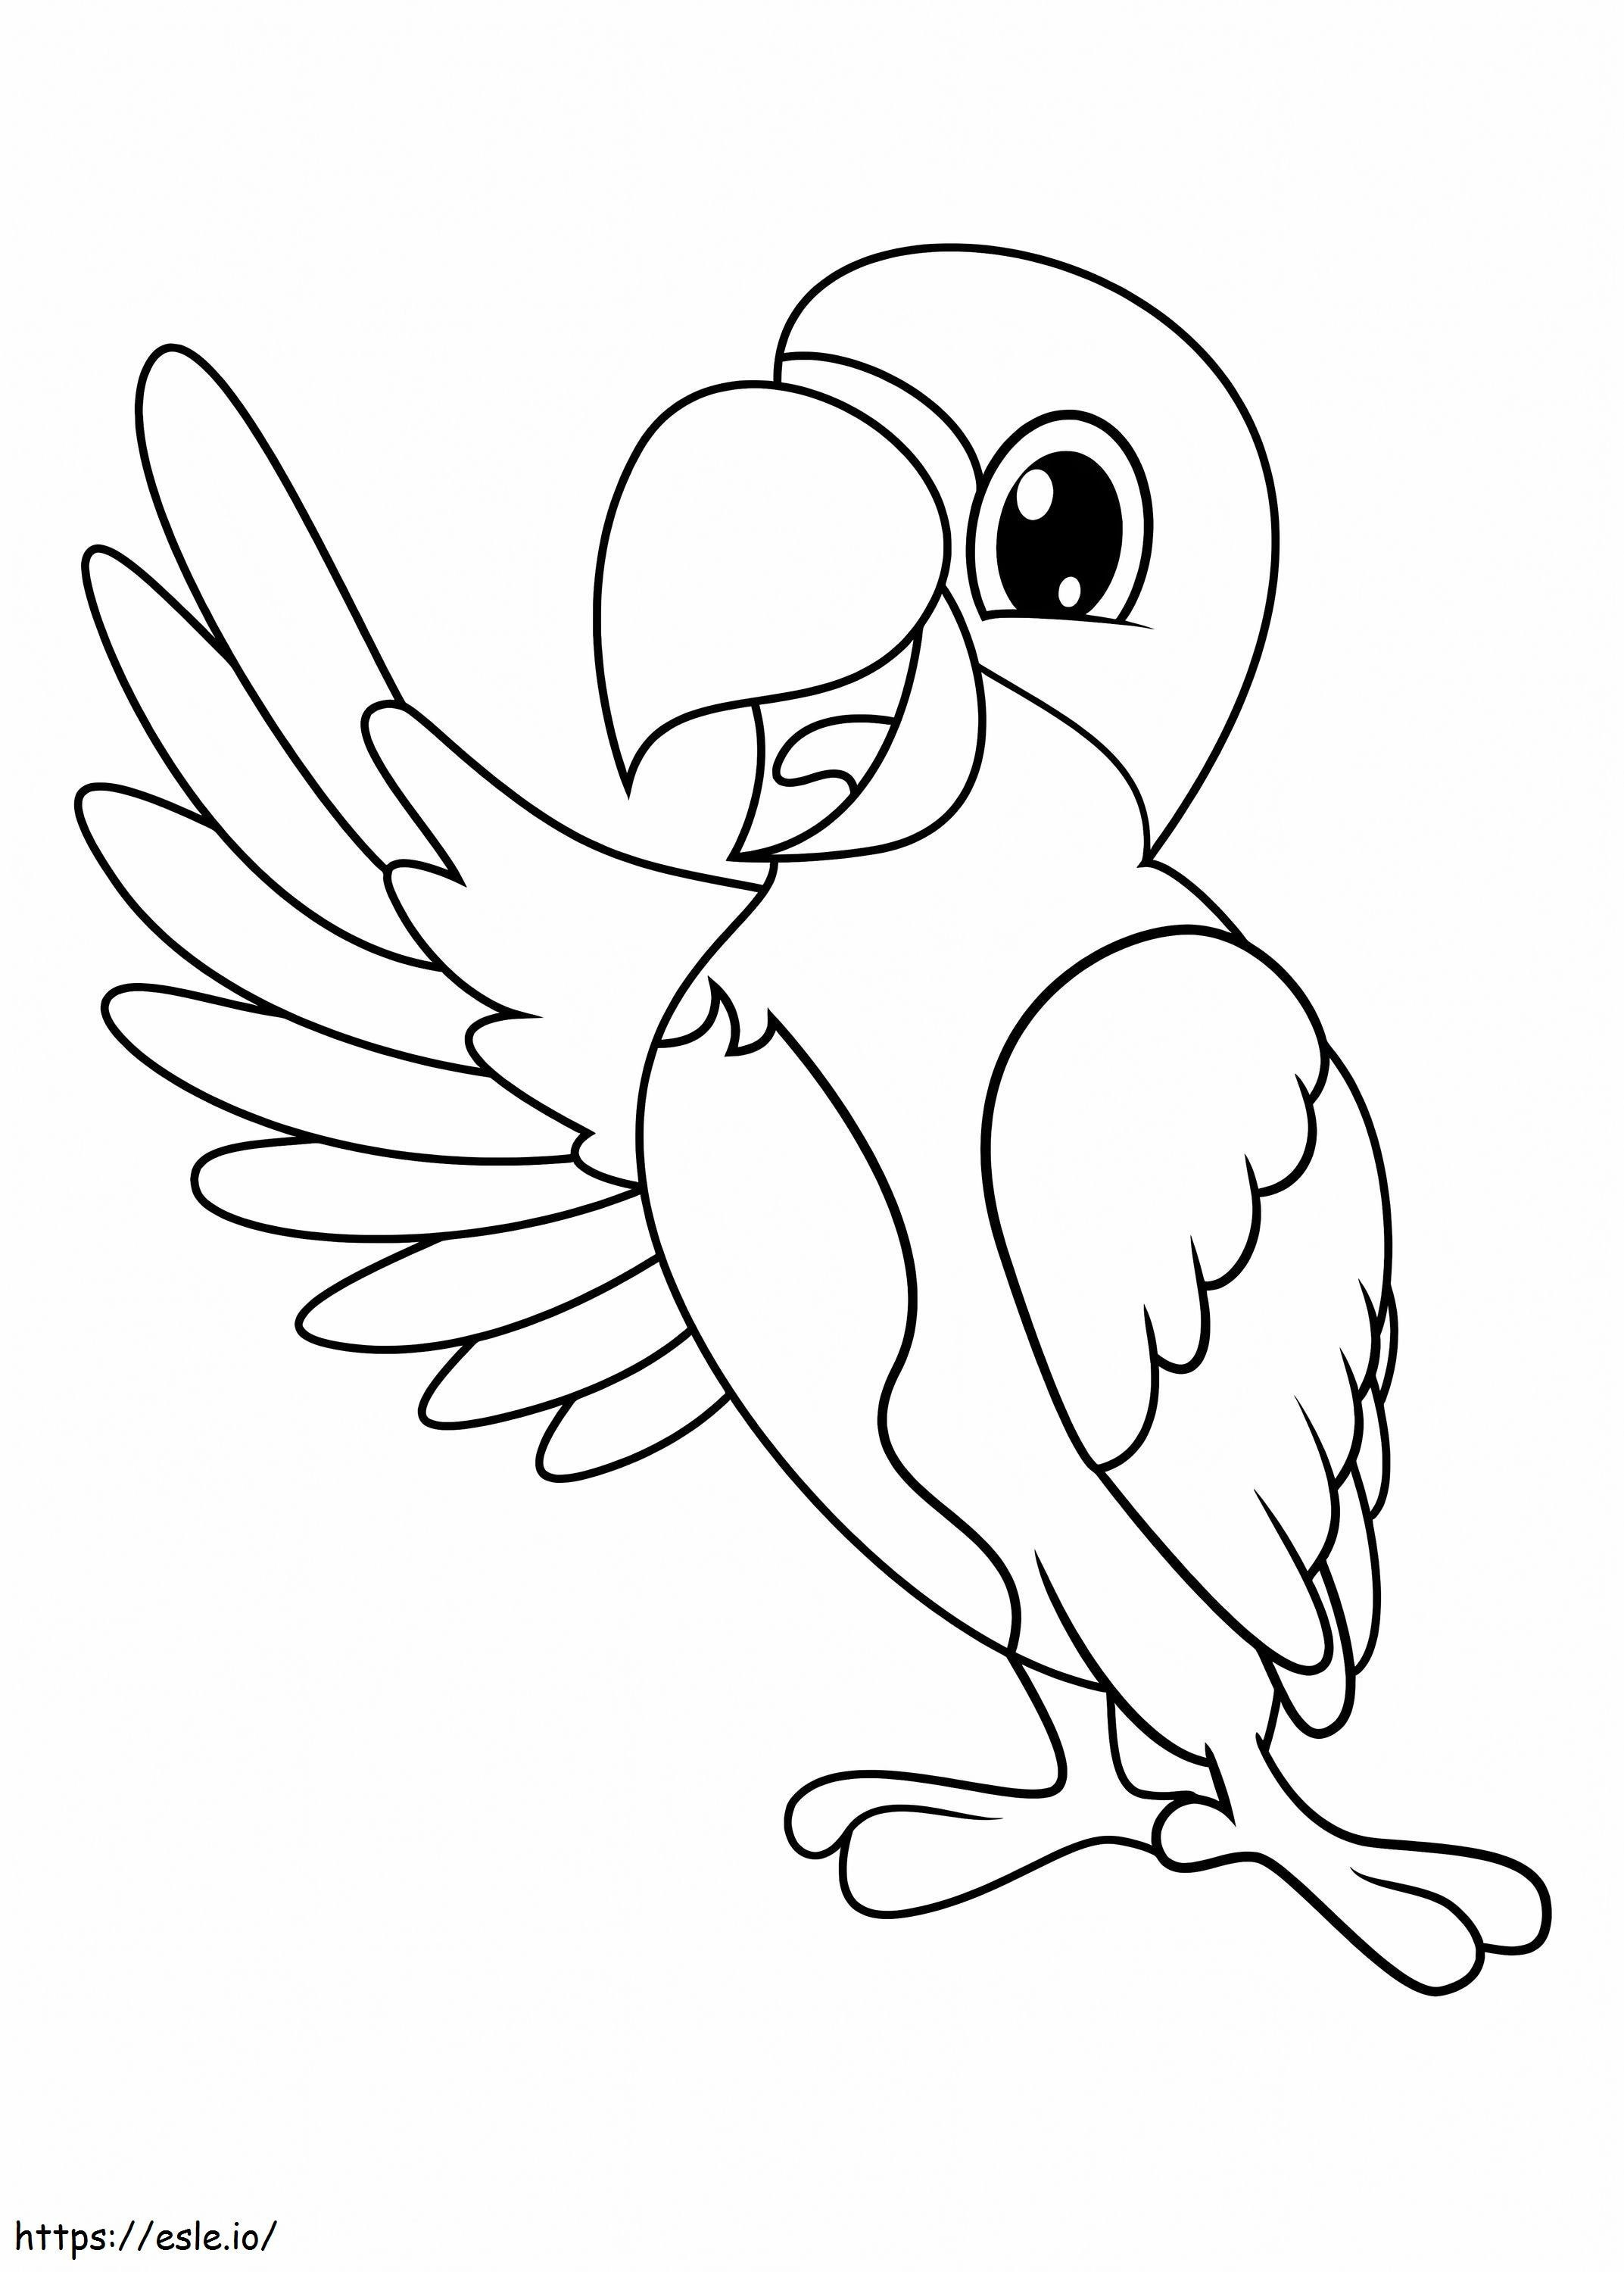 Parrot Say Hello coloring page